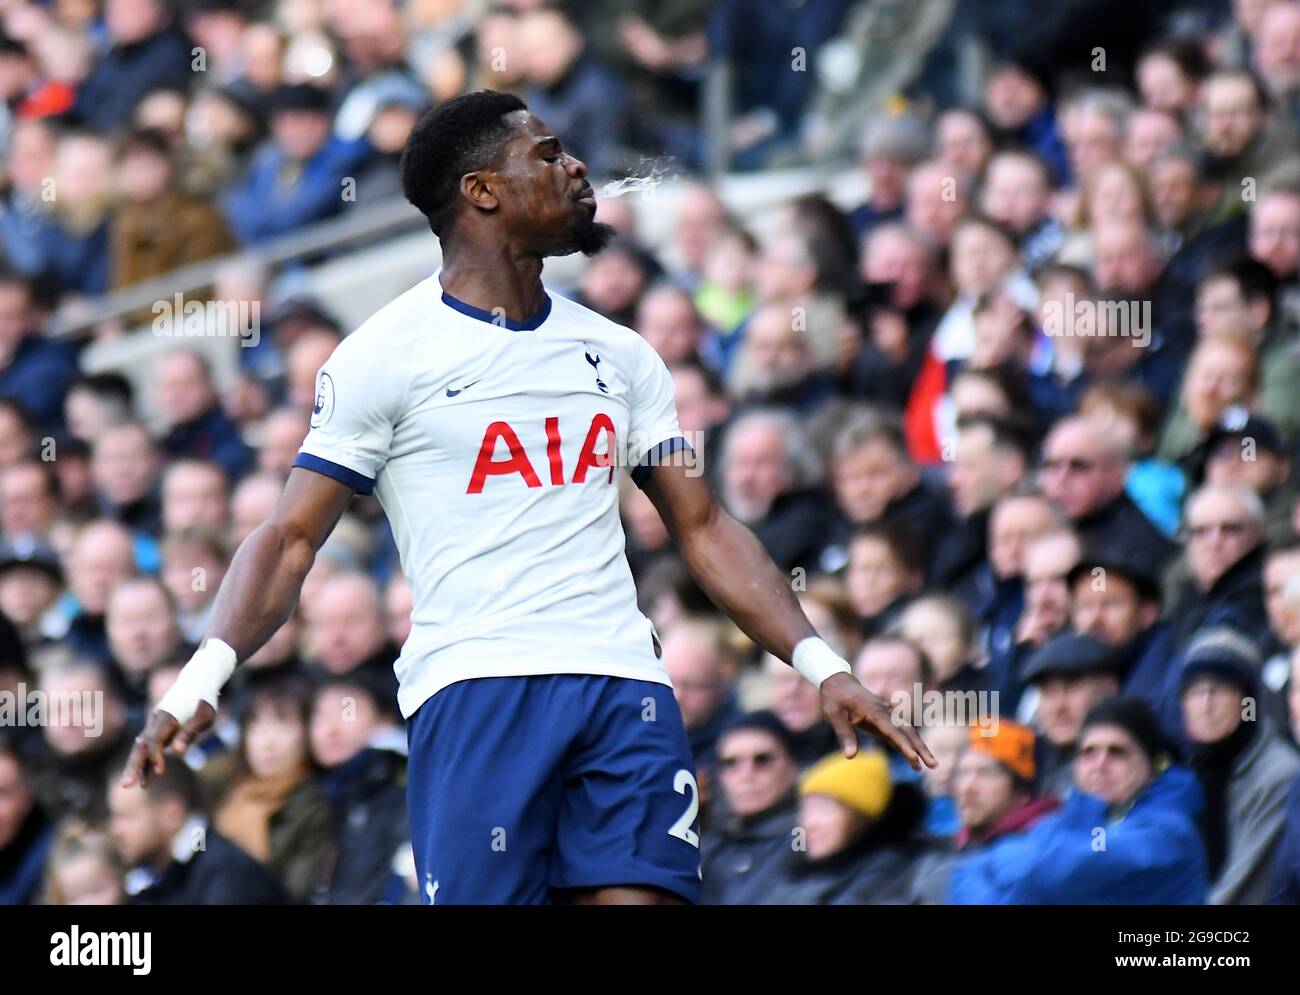 LONDON, ENGLAND - MArch 1, 2020: Serge Aurier of Tottenham pictured during the 2020/21 Premier League game between Tottenham Hotspur FC and Wolverhampton FC at Tottenham Hotspur Stadium. Stock Photo